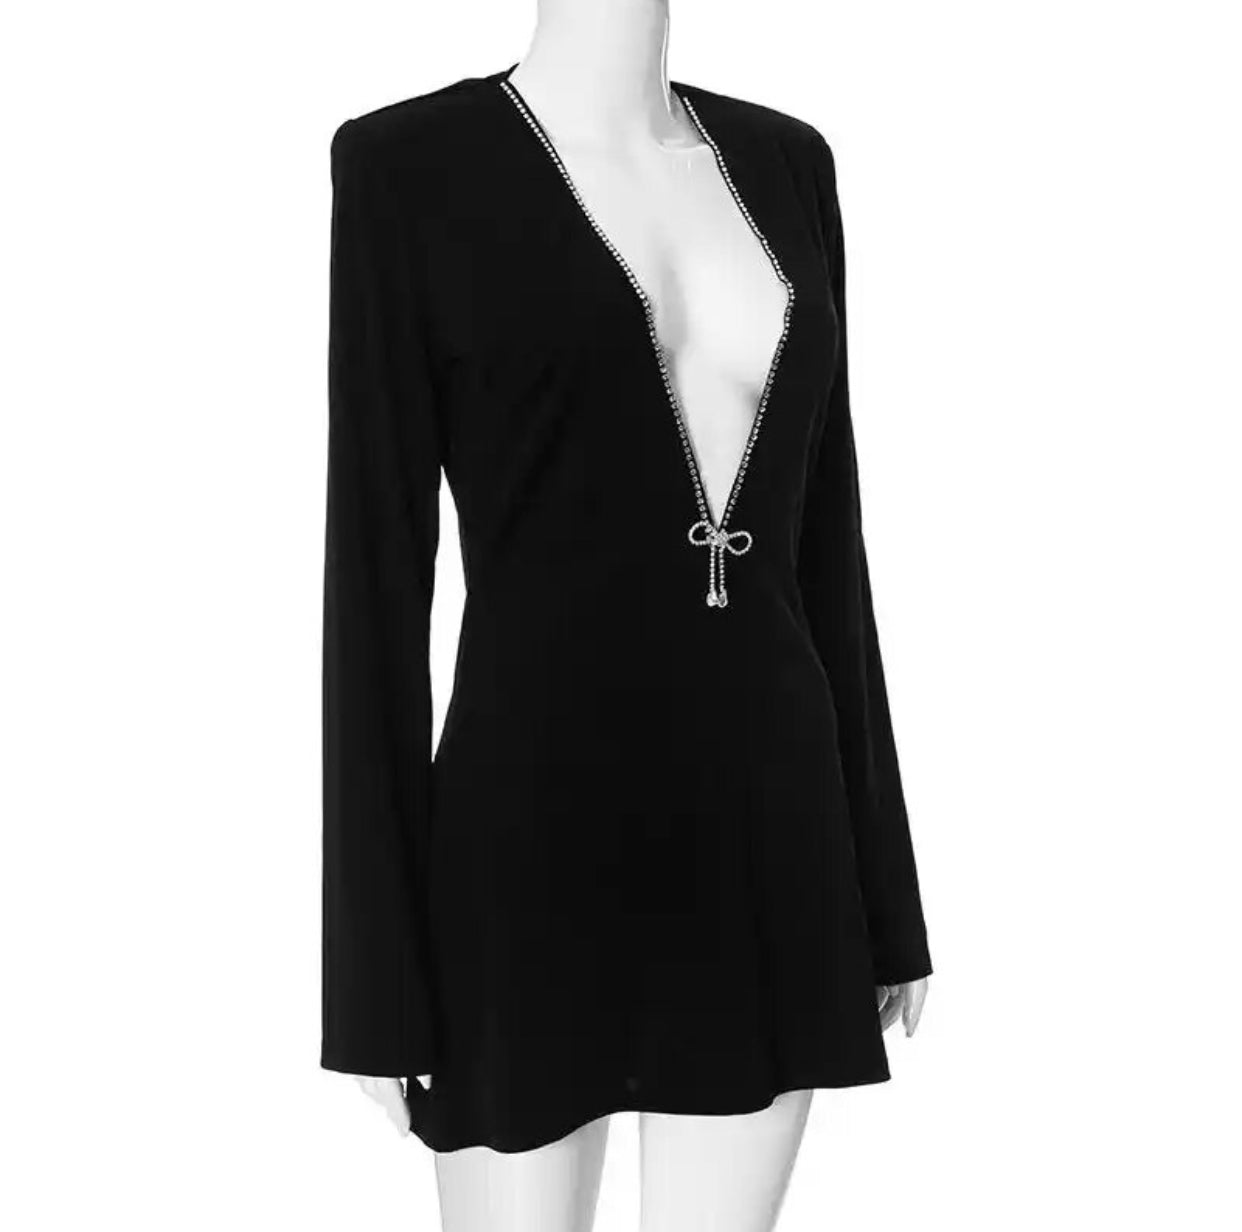 Custom Made: Very Sexy And Elegant Deep V-Neck Black Dress With Rhinestones And Spliced Long Sleeves. (Sizes: M-L)